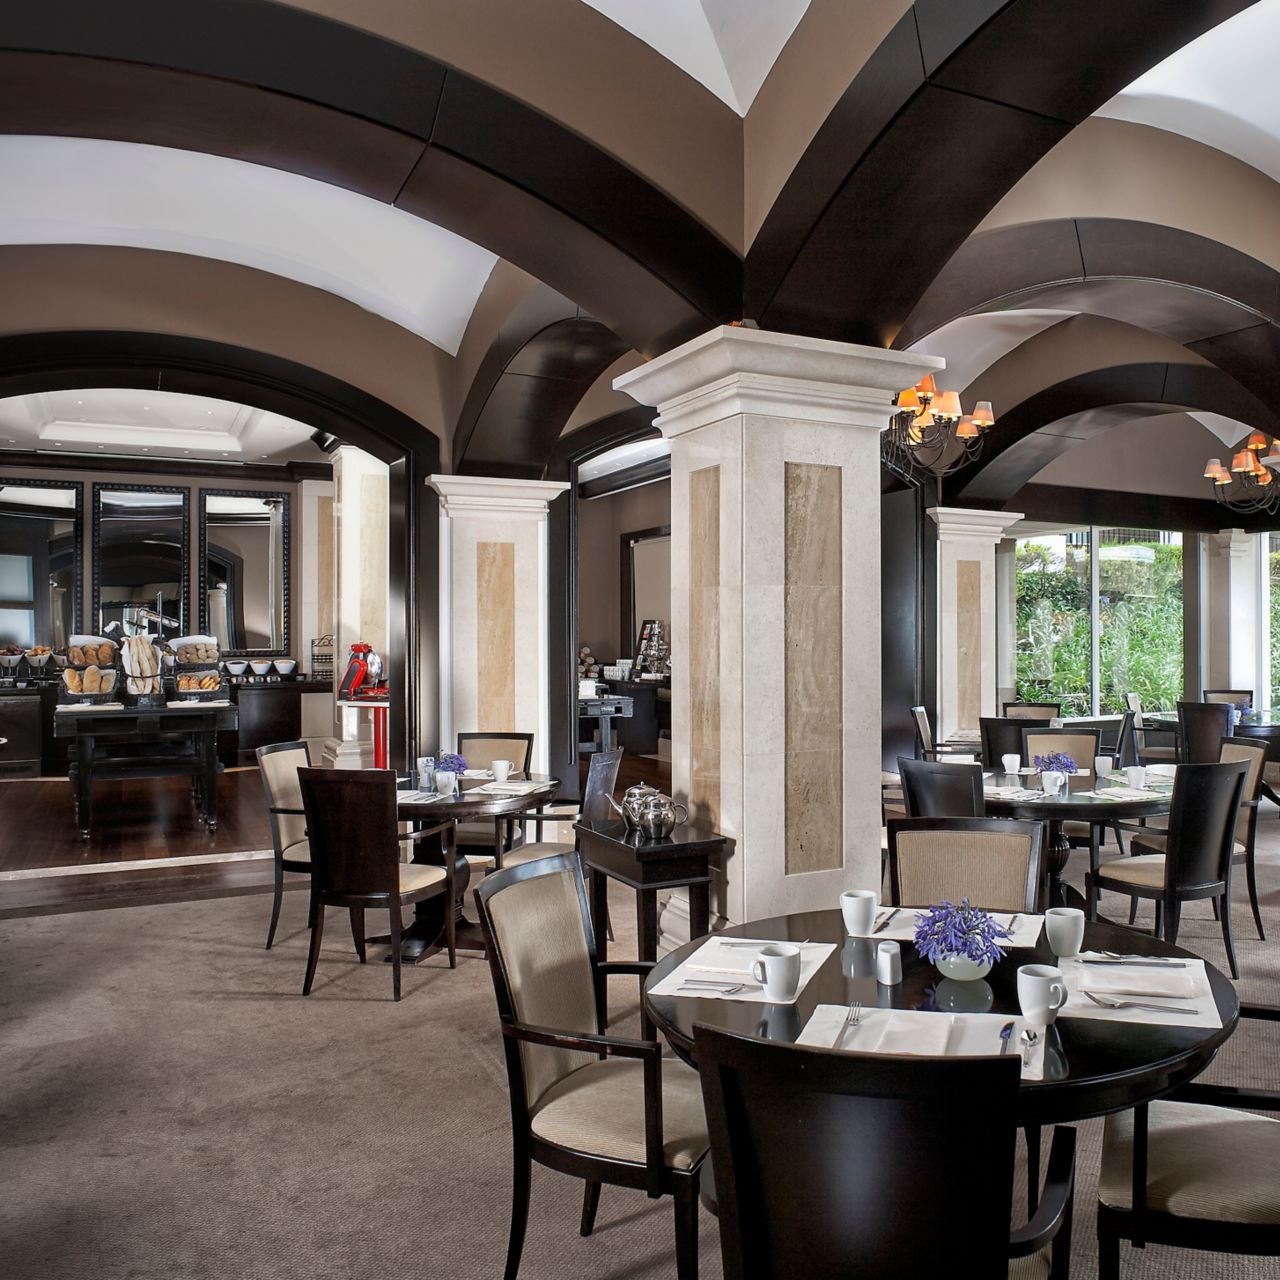 An elegant dining room with arched ceilings, columns, a buffet area and floor-to-ceiling windows